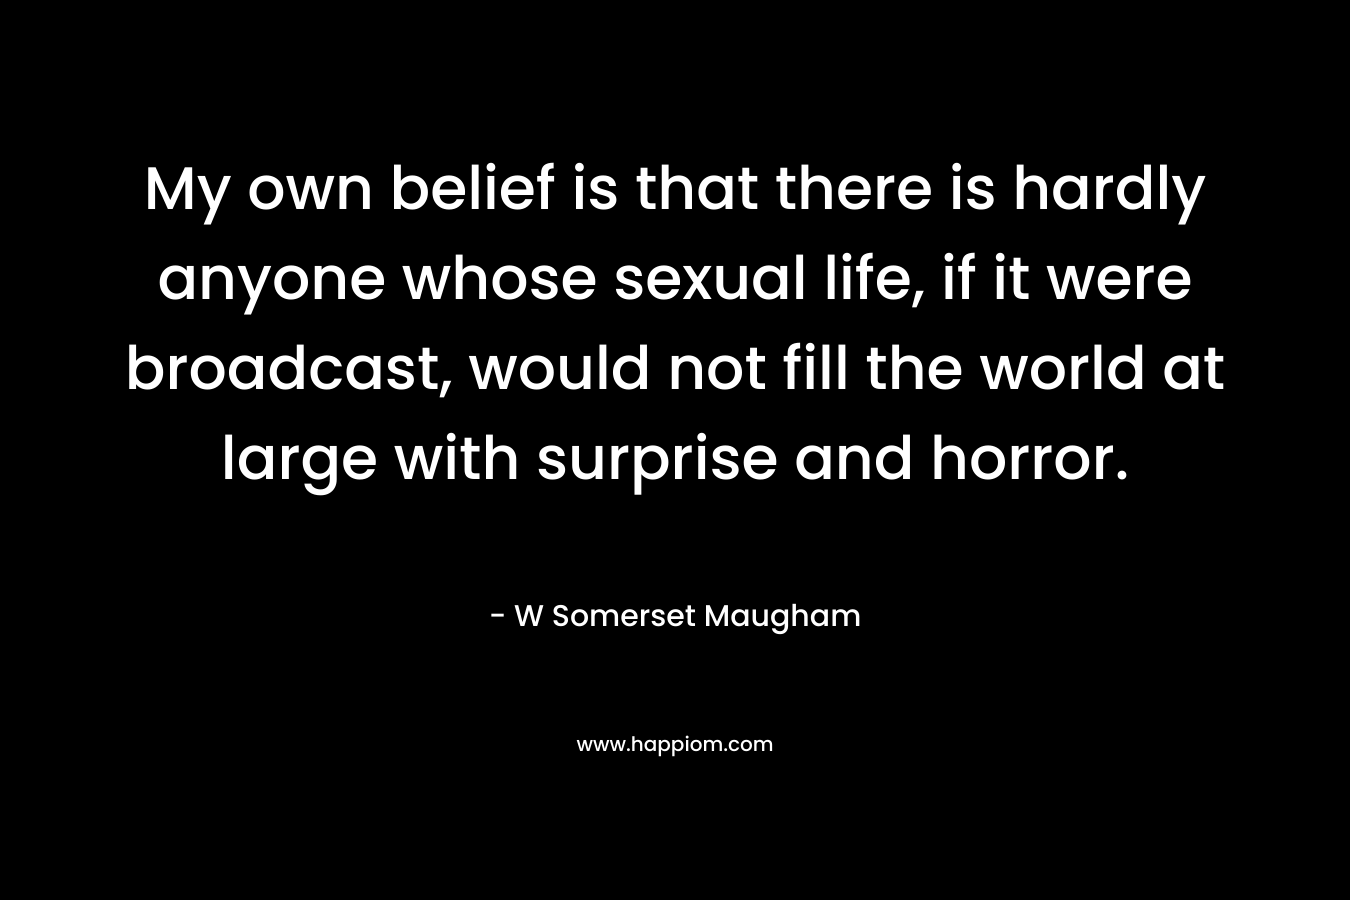 My own belief is that there is hardly anyone whose sexual life, if it were broadcast, would not fill the world at large with surprise and horror.